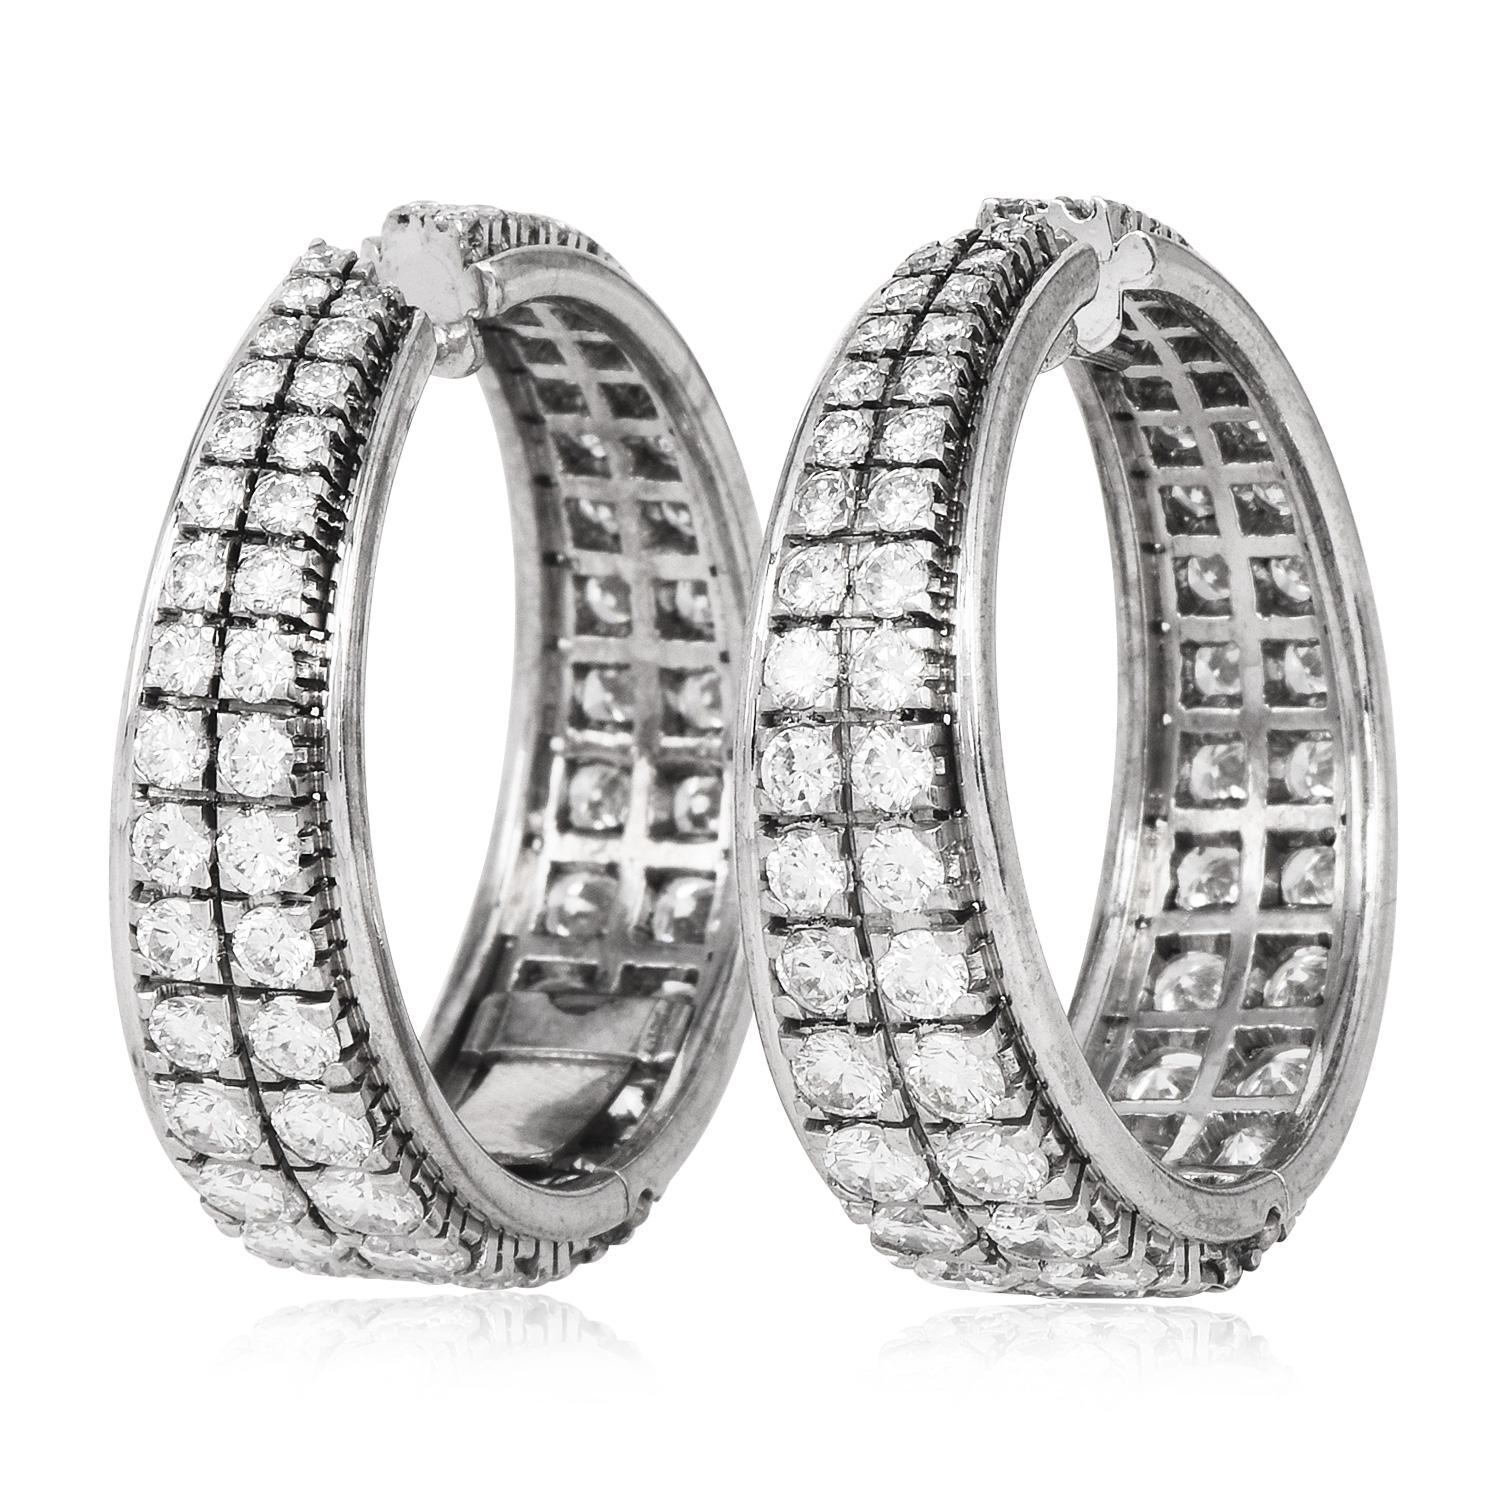 These beautiful high-quality Diamond Earrings were inspired by a Hoop with a graduated channeled style. Crafted in 18K White Gold.

Embellished by 128 bright white round, brilliant-cut diamonds adorning these earrings

weighing approx. 5.50 carat,